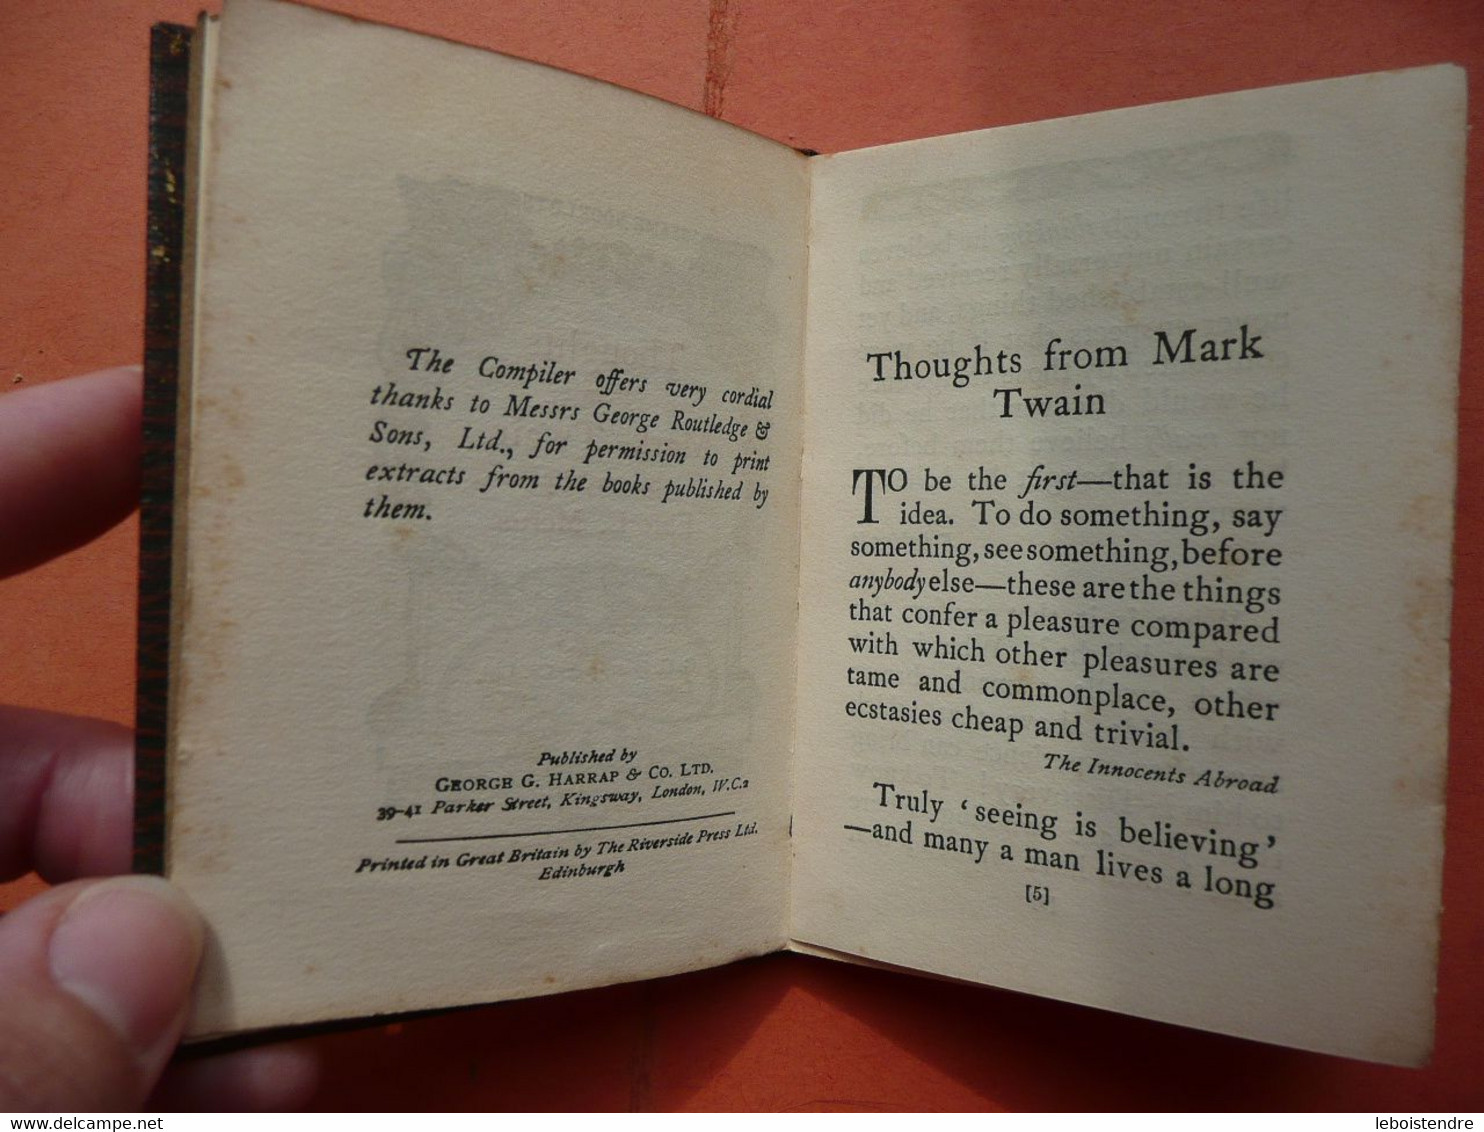 THOUGHTS FROM MARK TWAIN SELECTED BY ELSIE E. MORTON SESAME BOOKLETS MINIATURE